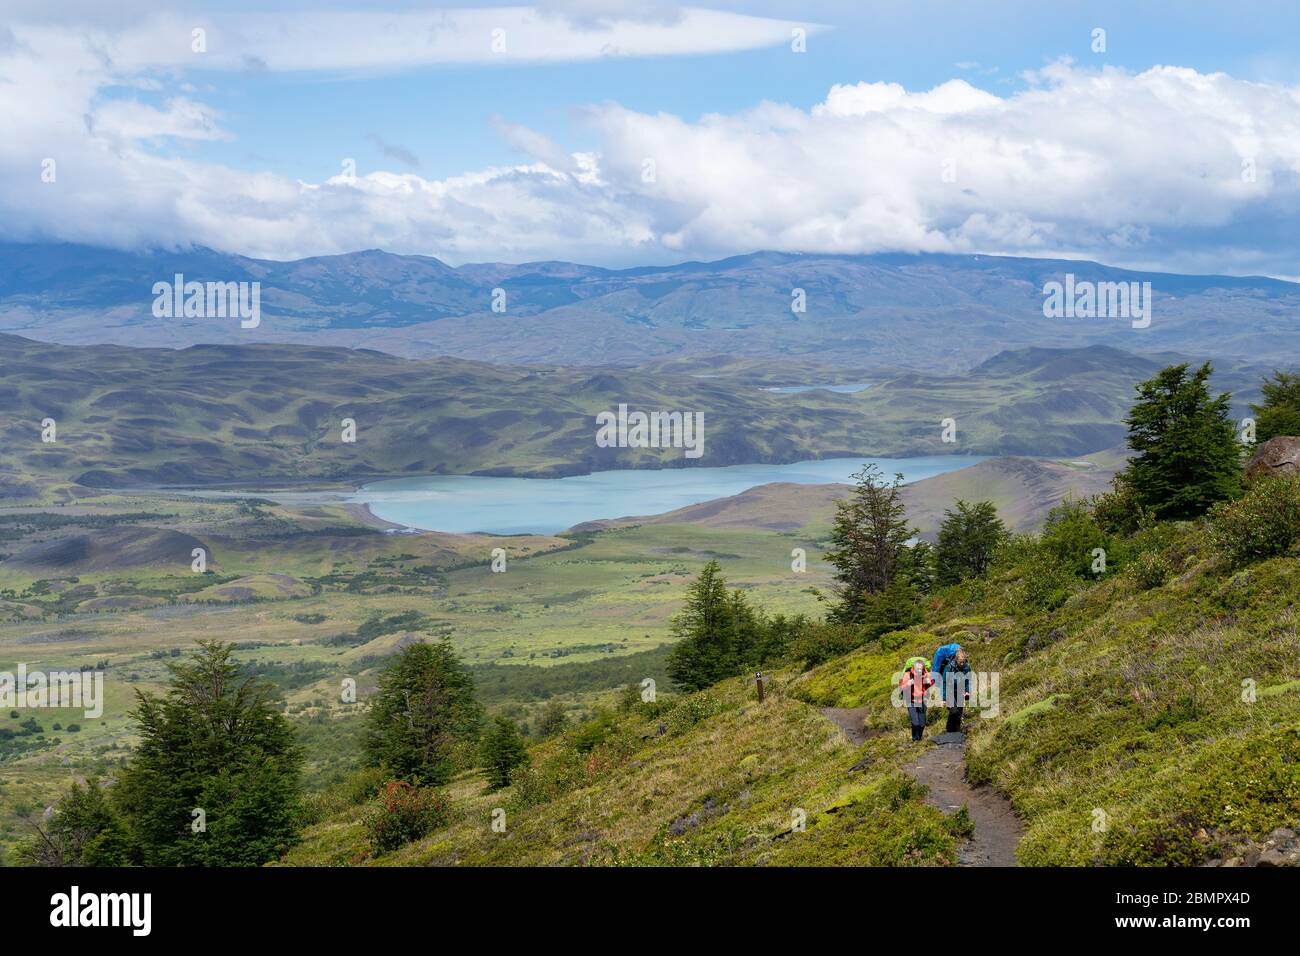 Hikers walking the famous W Trek in Torres del Paine National Park in Patagonia, Chile, South America. Stock Photo